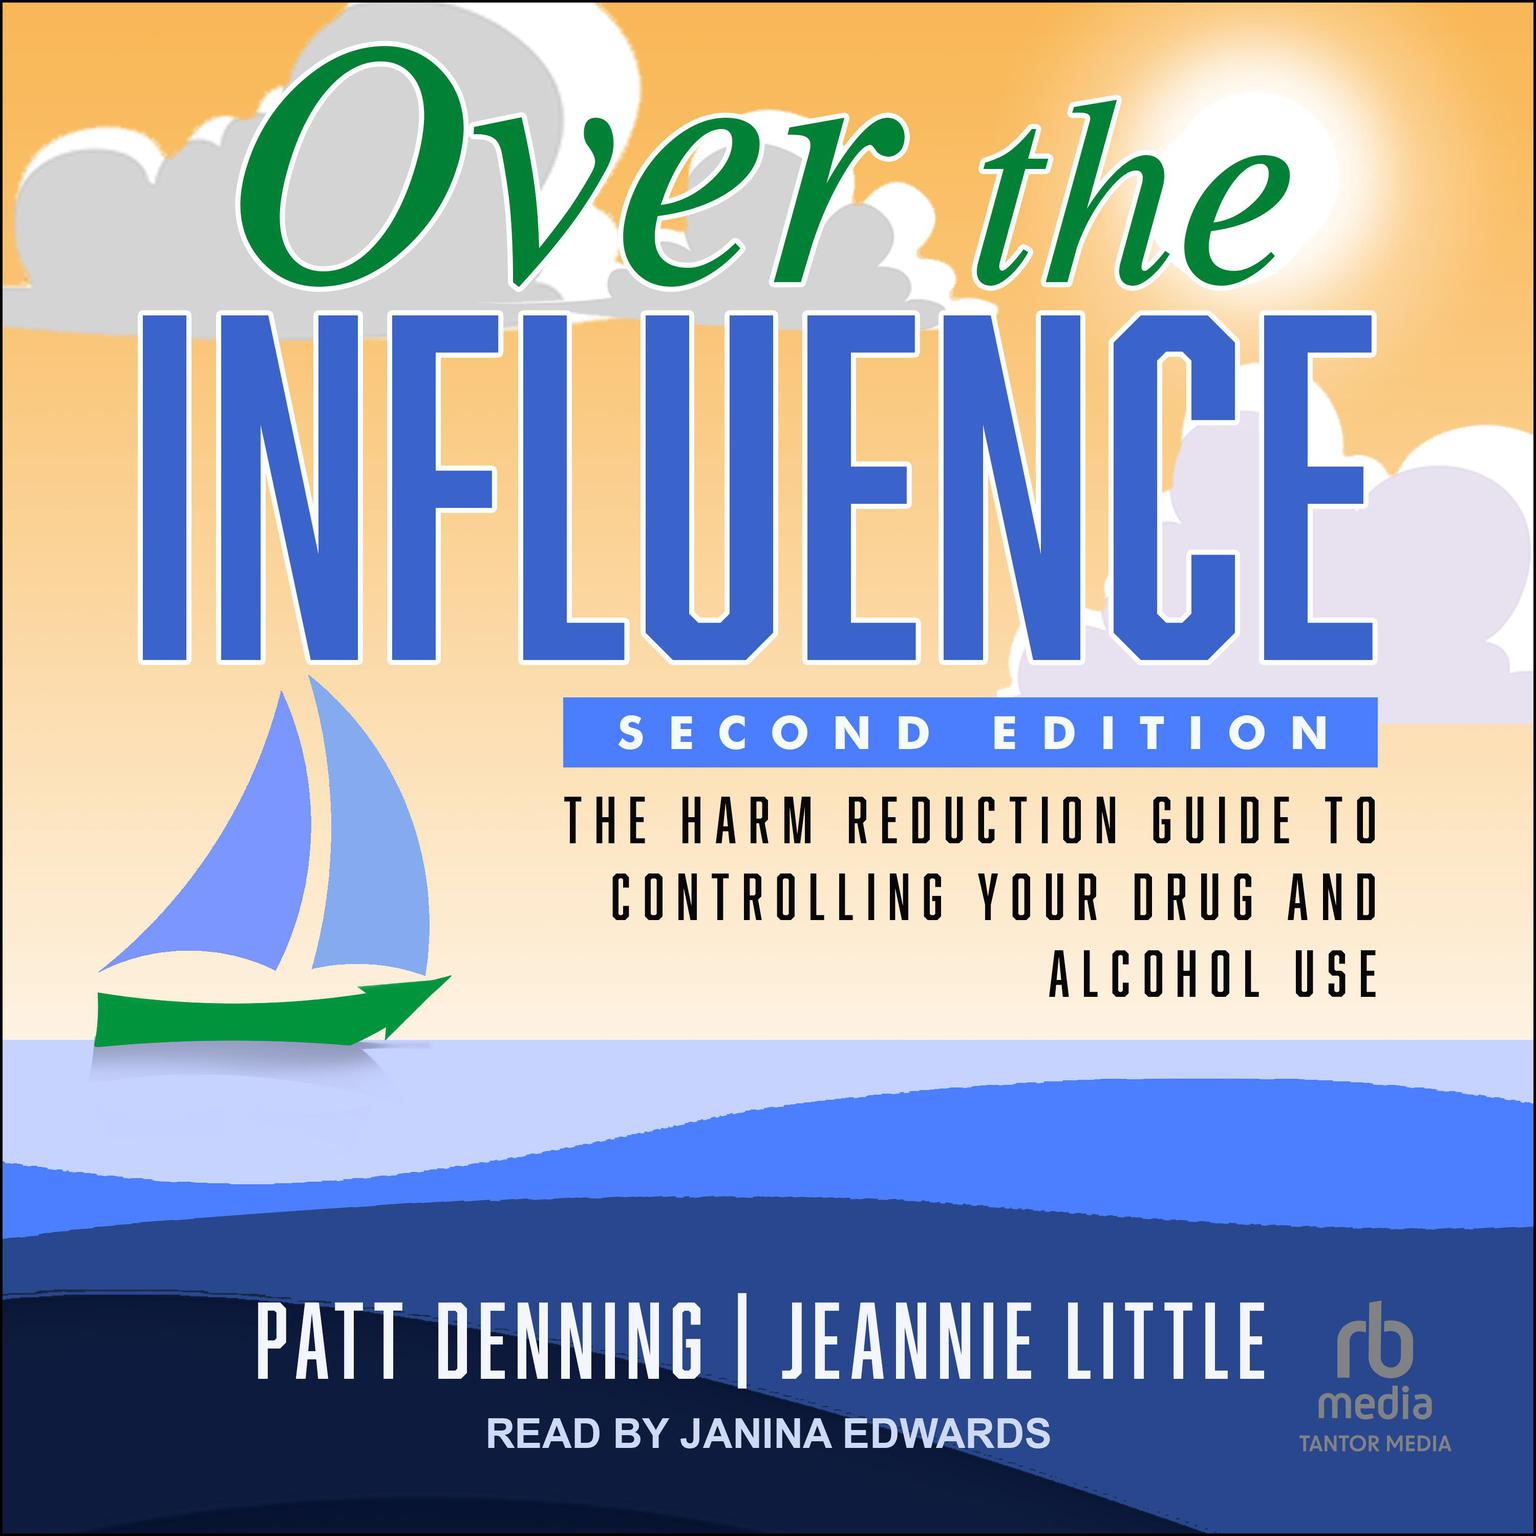 Over the Influence: The Harm Reduction Guide to Controlling Your Drug and Alcohol Use: Second Edition Audiobook, by Jeannie Little